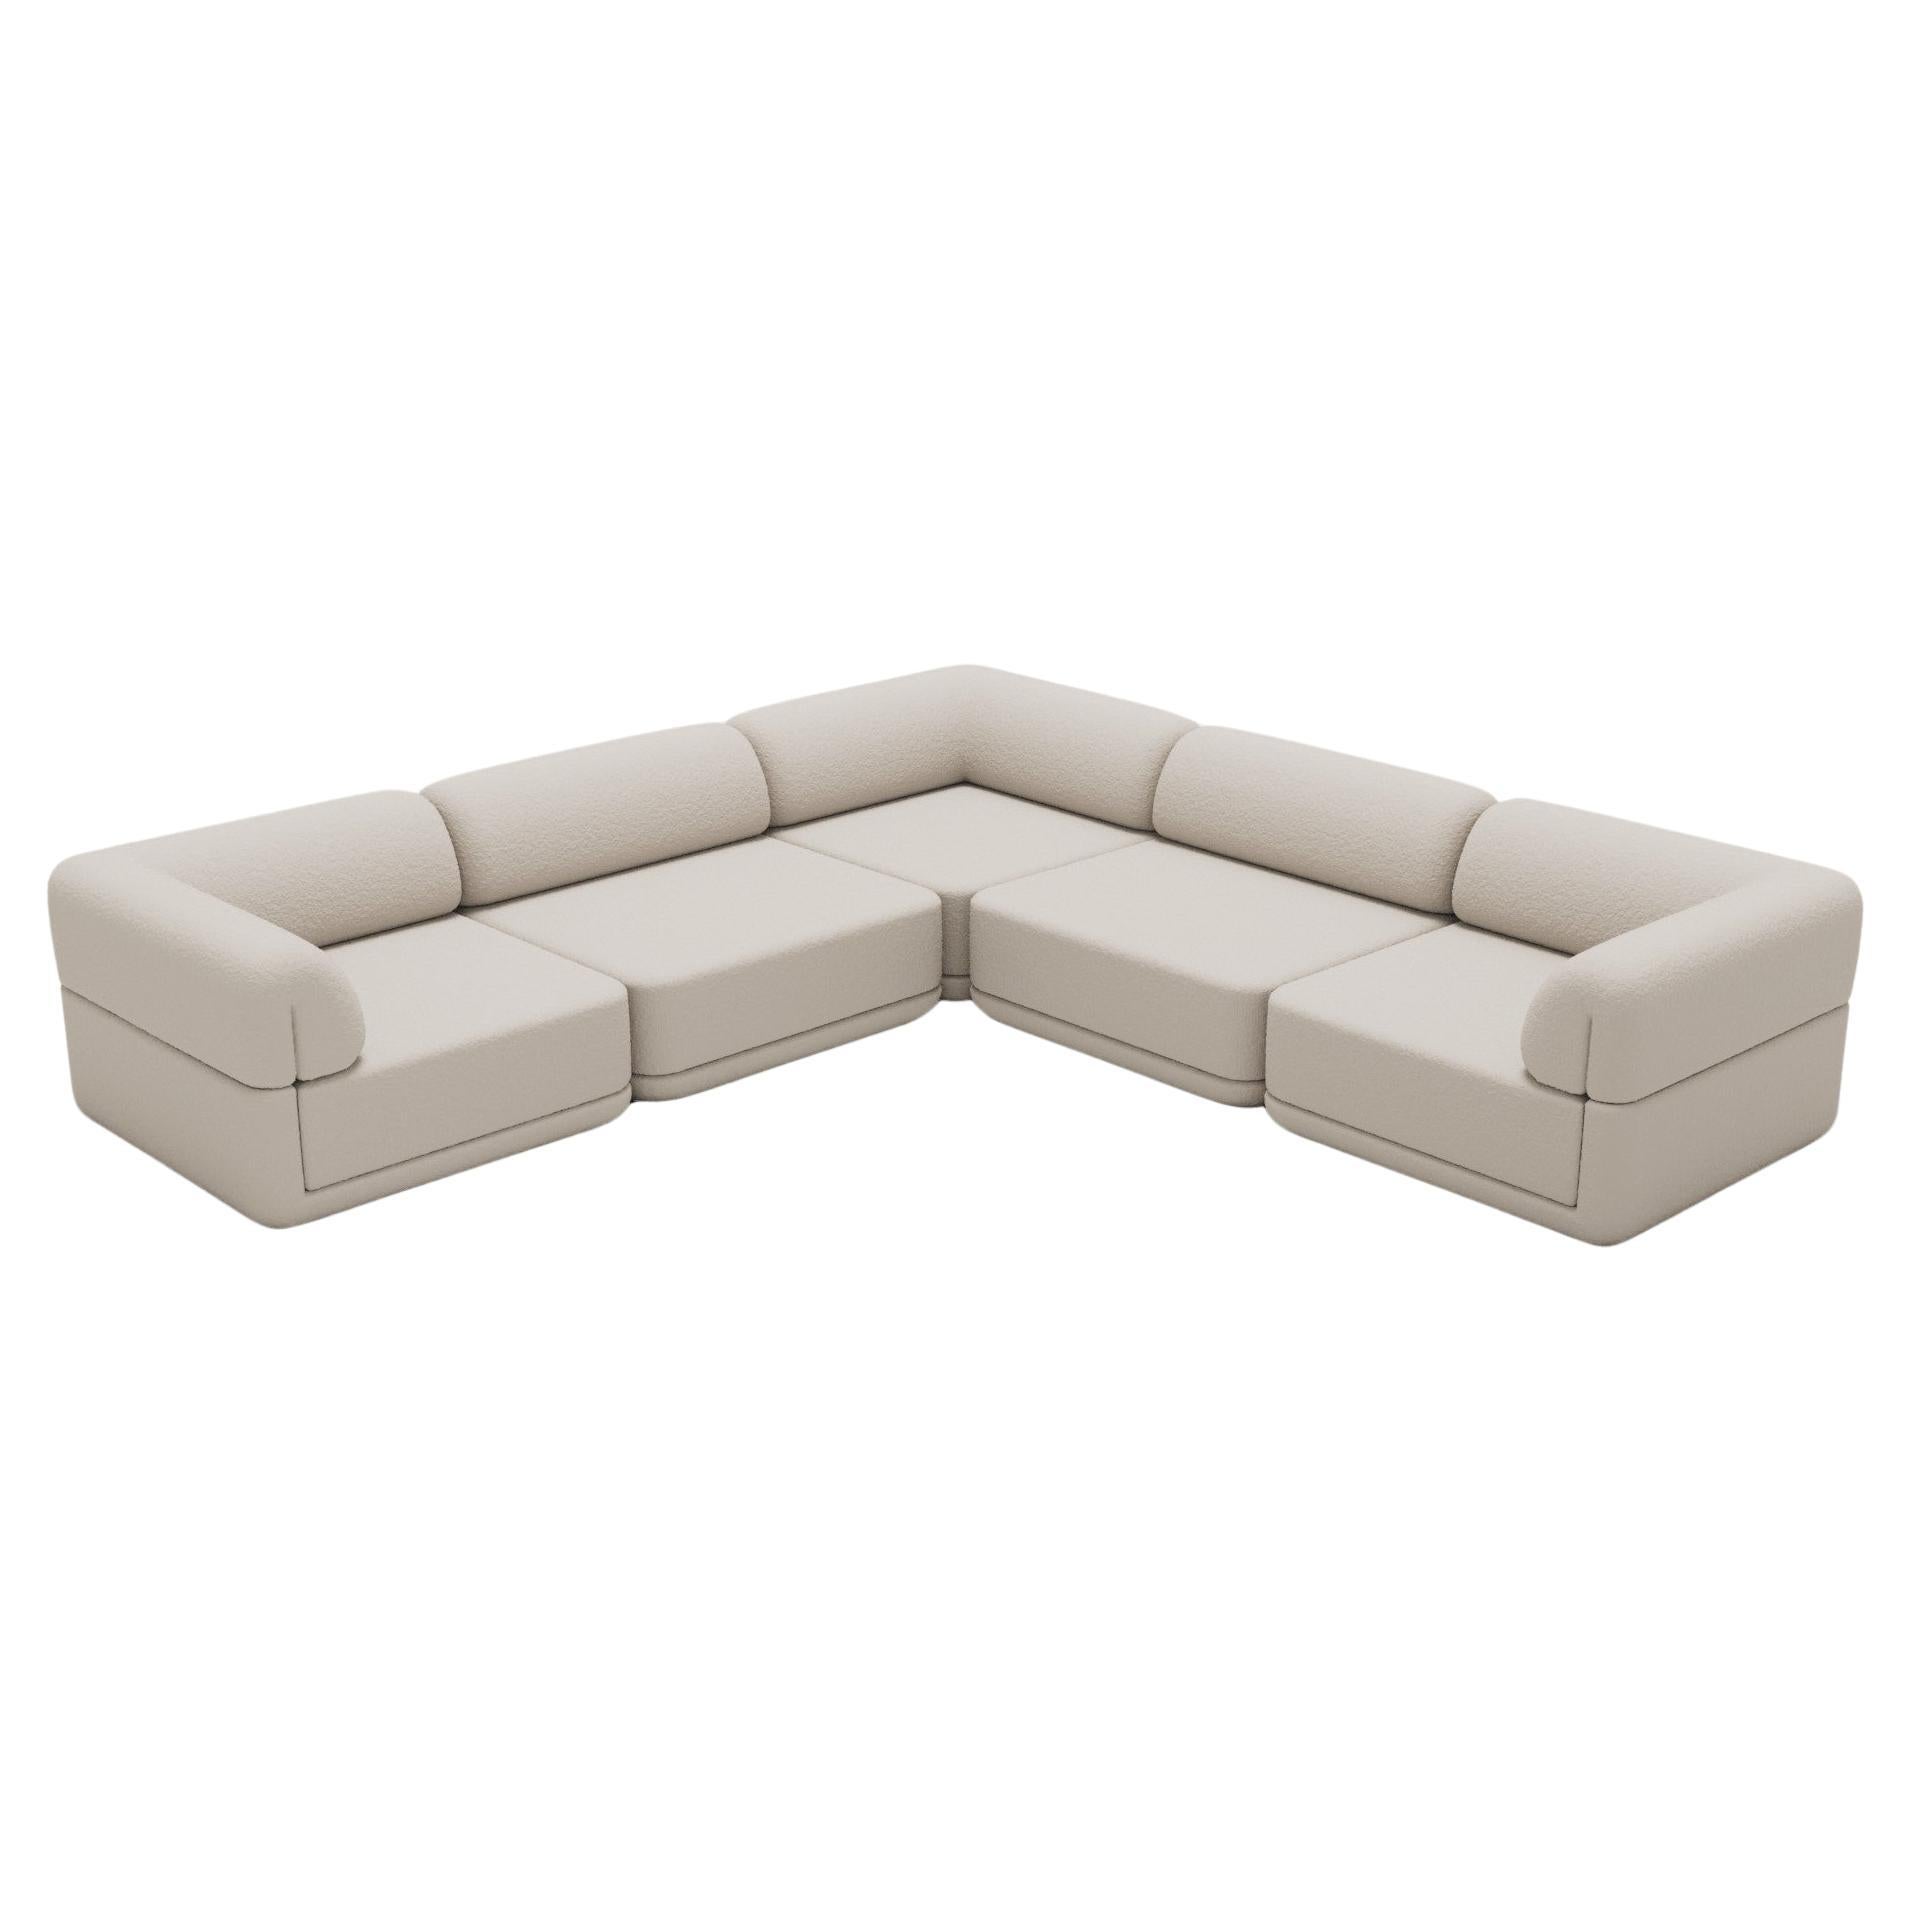 The Cube Sofa - Corner Lounge Sectional For Sale